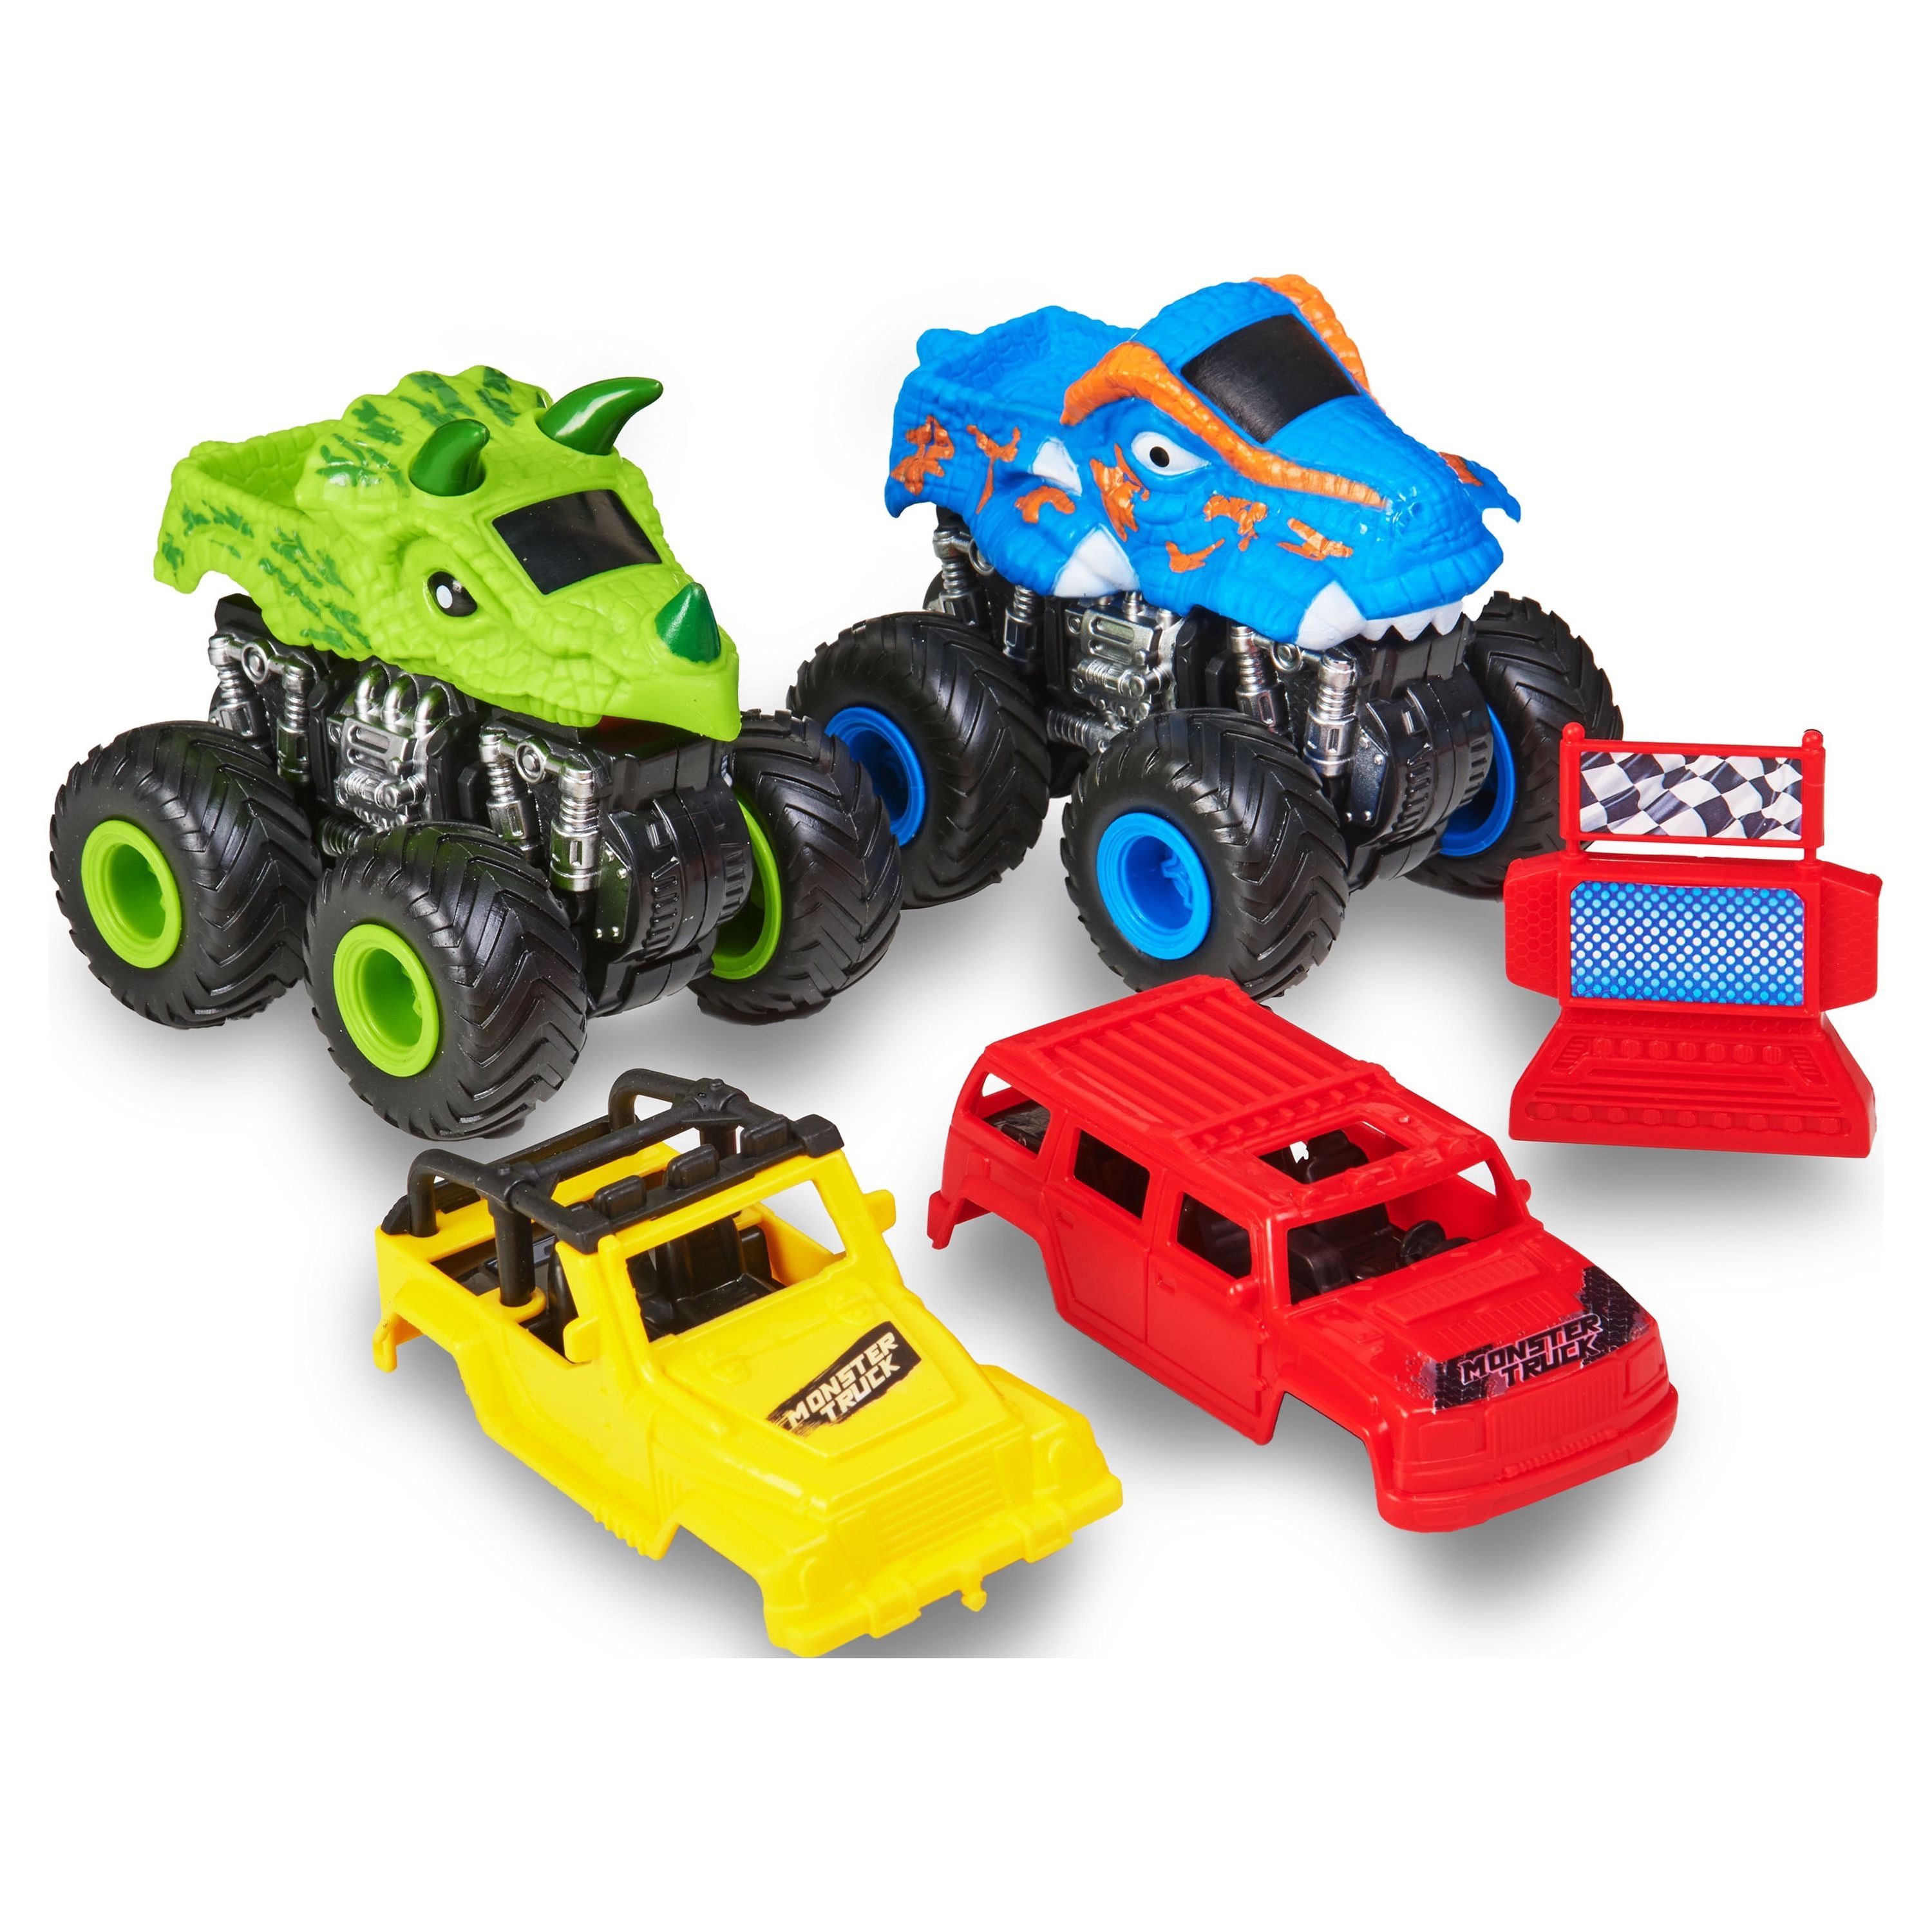 Kid Connection Monster Truck Play Set, 7 Pieces | MTTS118